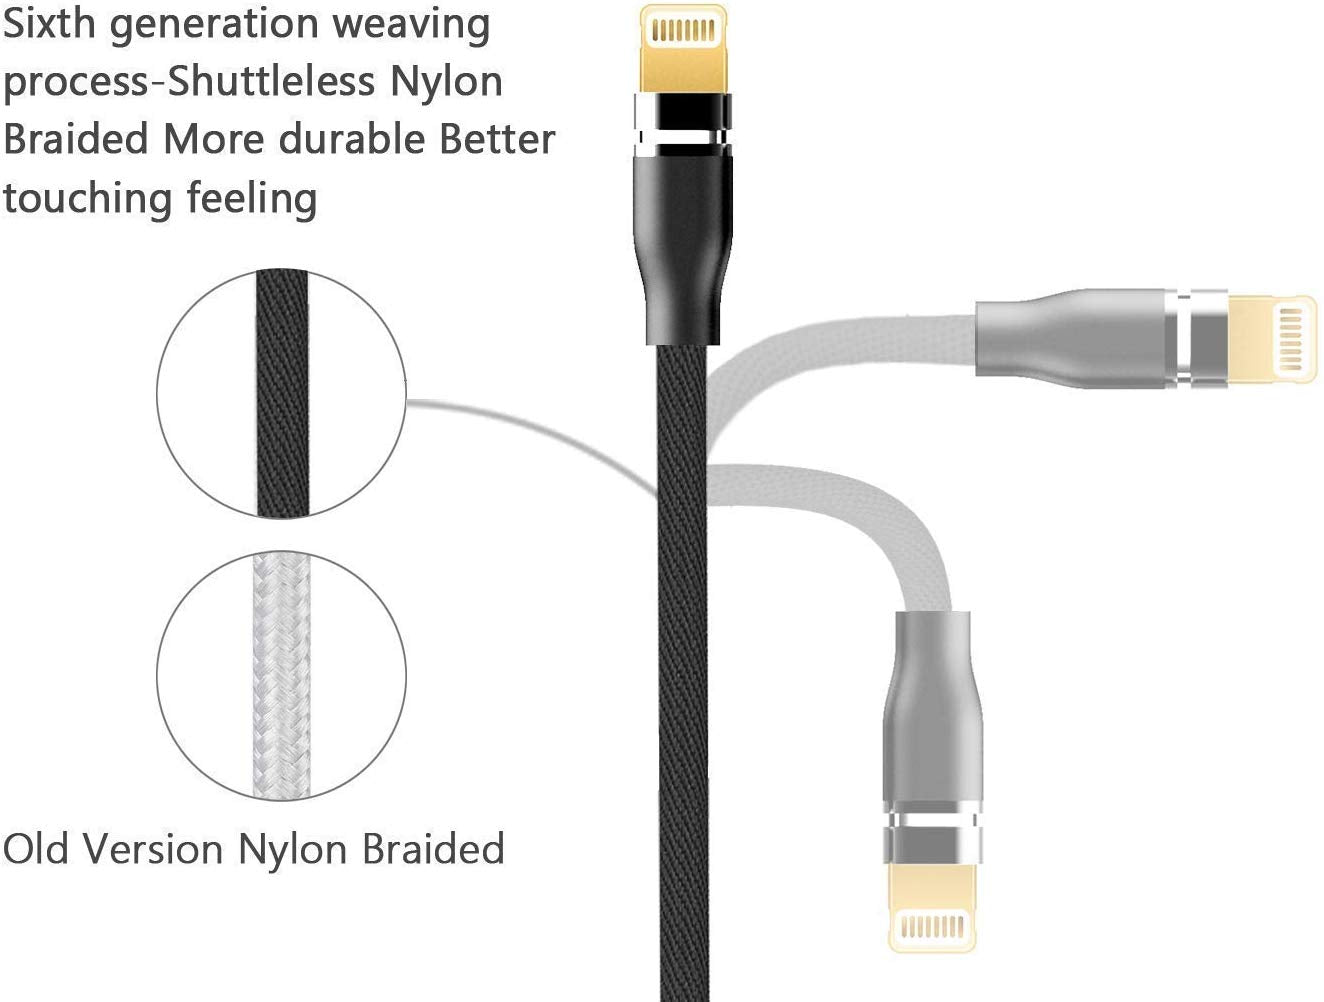 3.0A Tough Braided Unbreakable 3 in 1 Nylon Charging Cable (1.2 mtr)